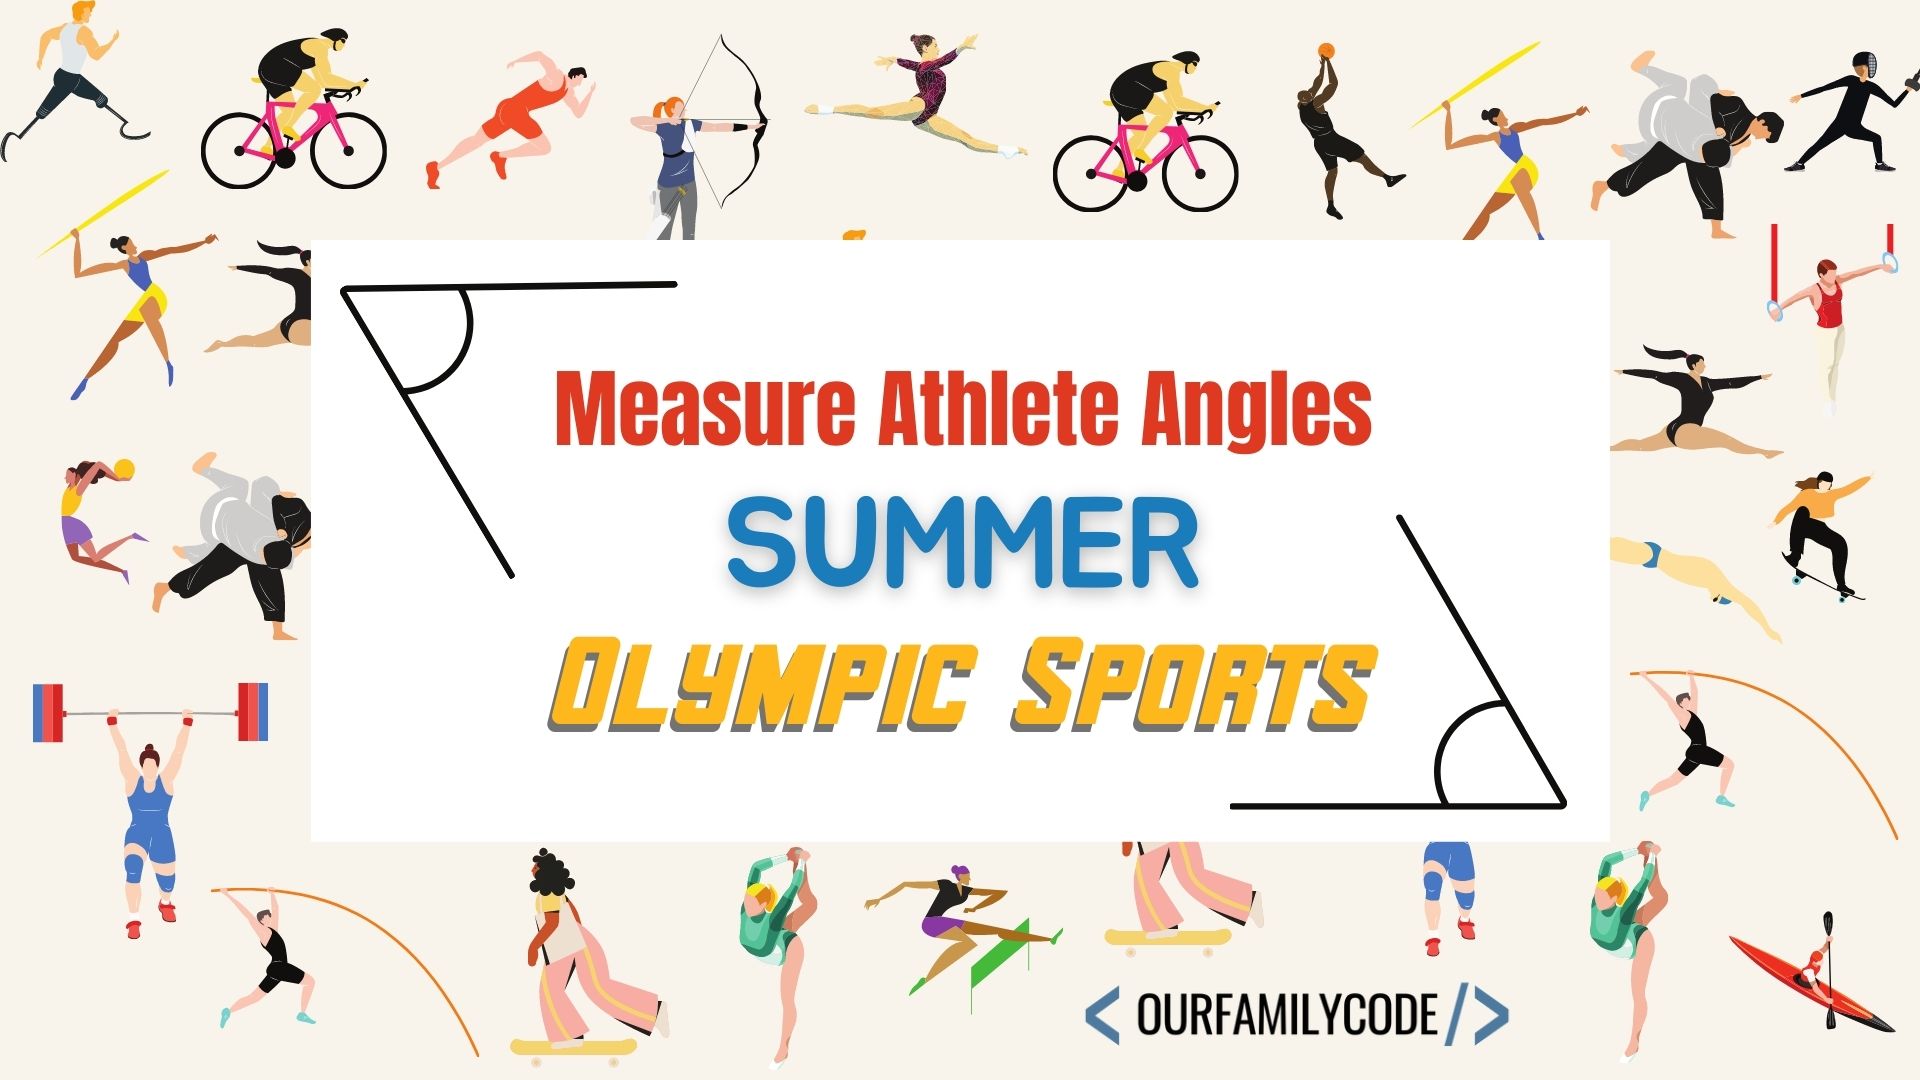 A picture of summer sport vectors on a tan background with text that reads "measure athlete angles summer olympic sports".